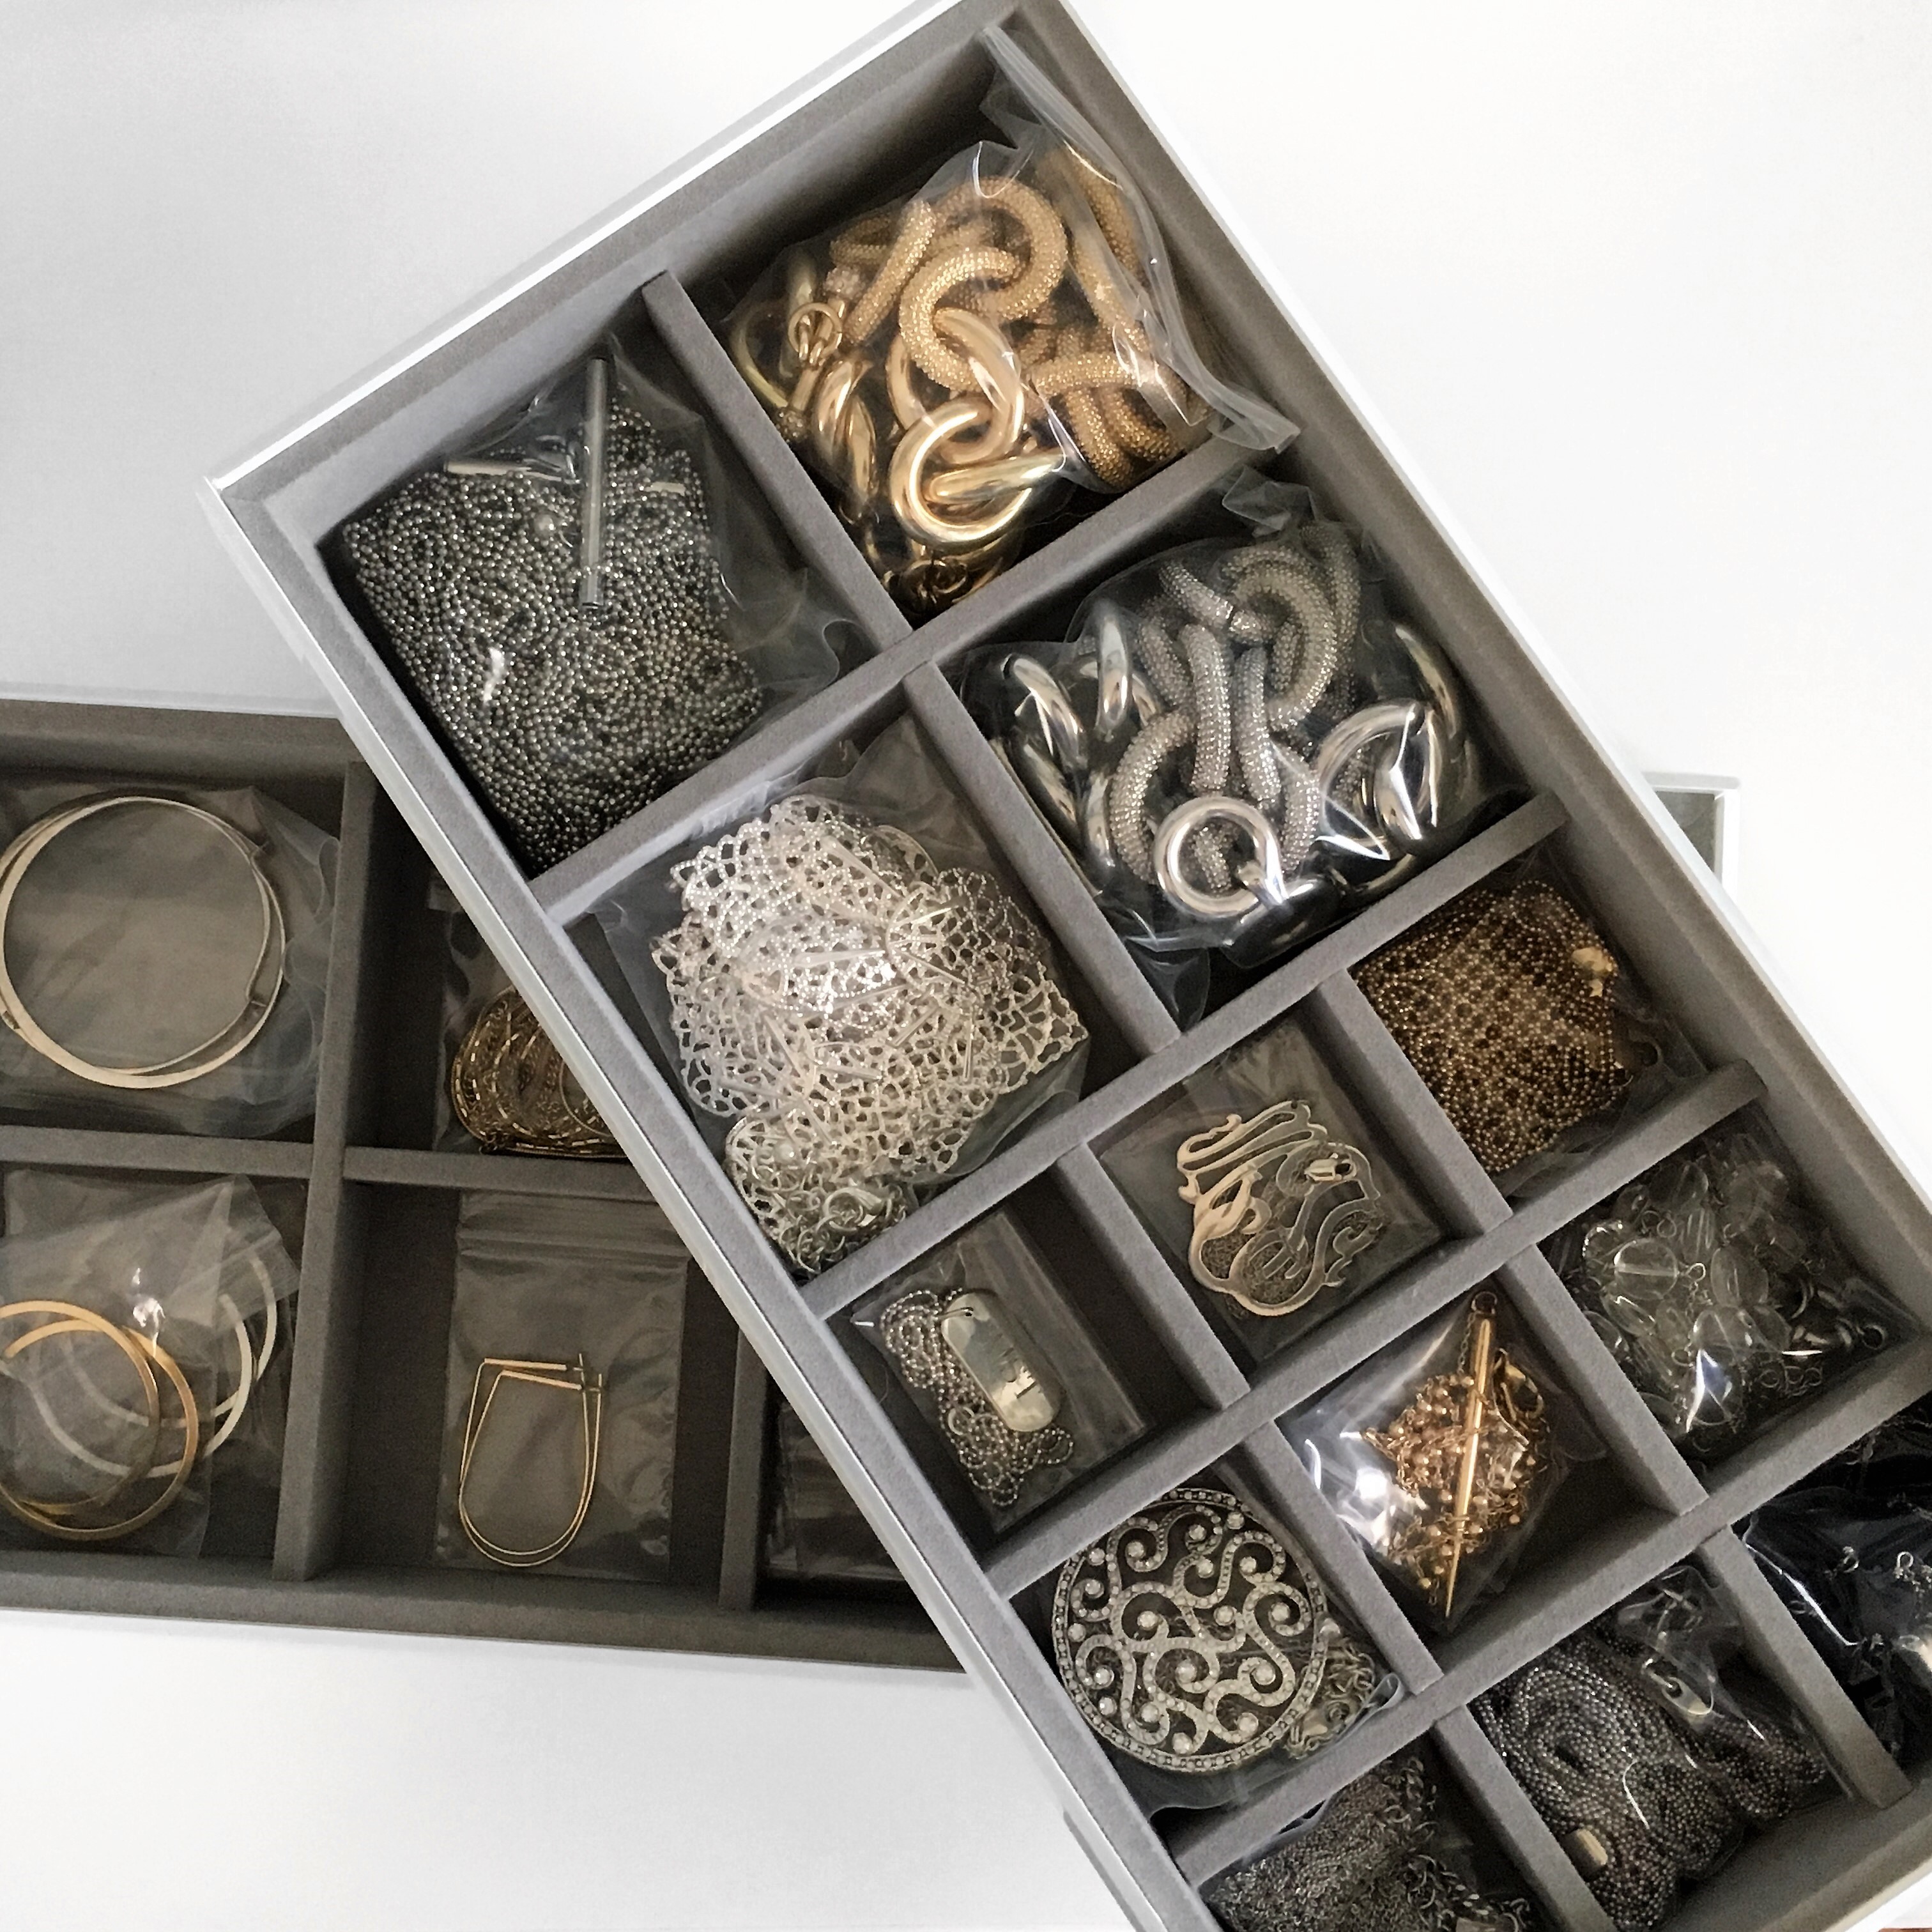 Jewelry Organized into Stacking Compartments